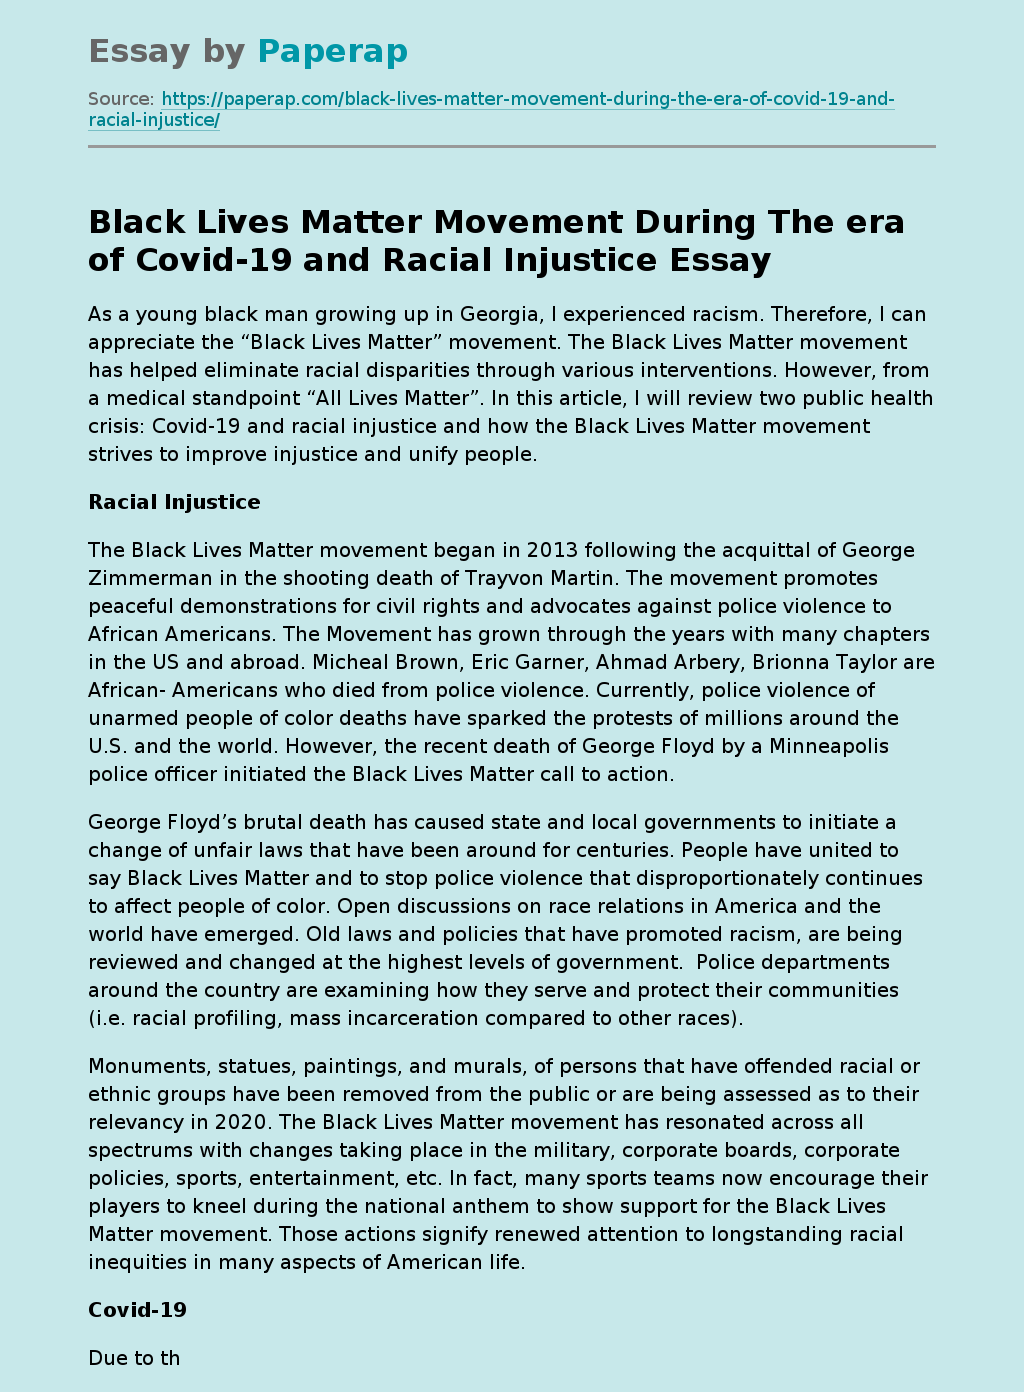 Black Lives Matter Movement During The era of Covid-19 and Racial Injustice